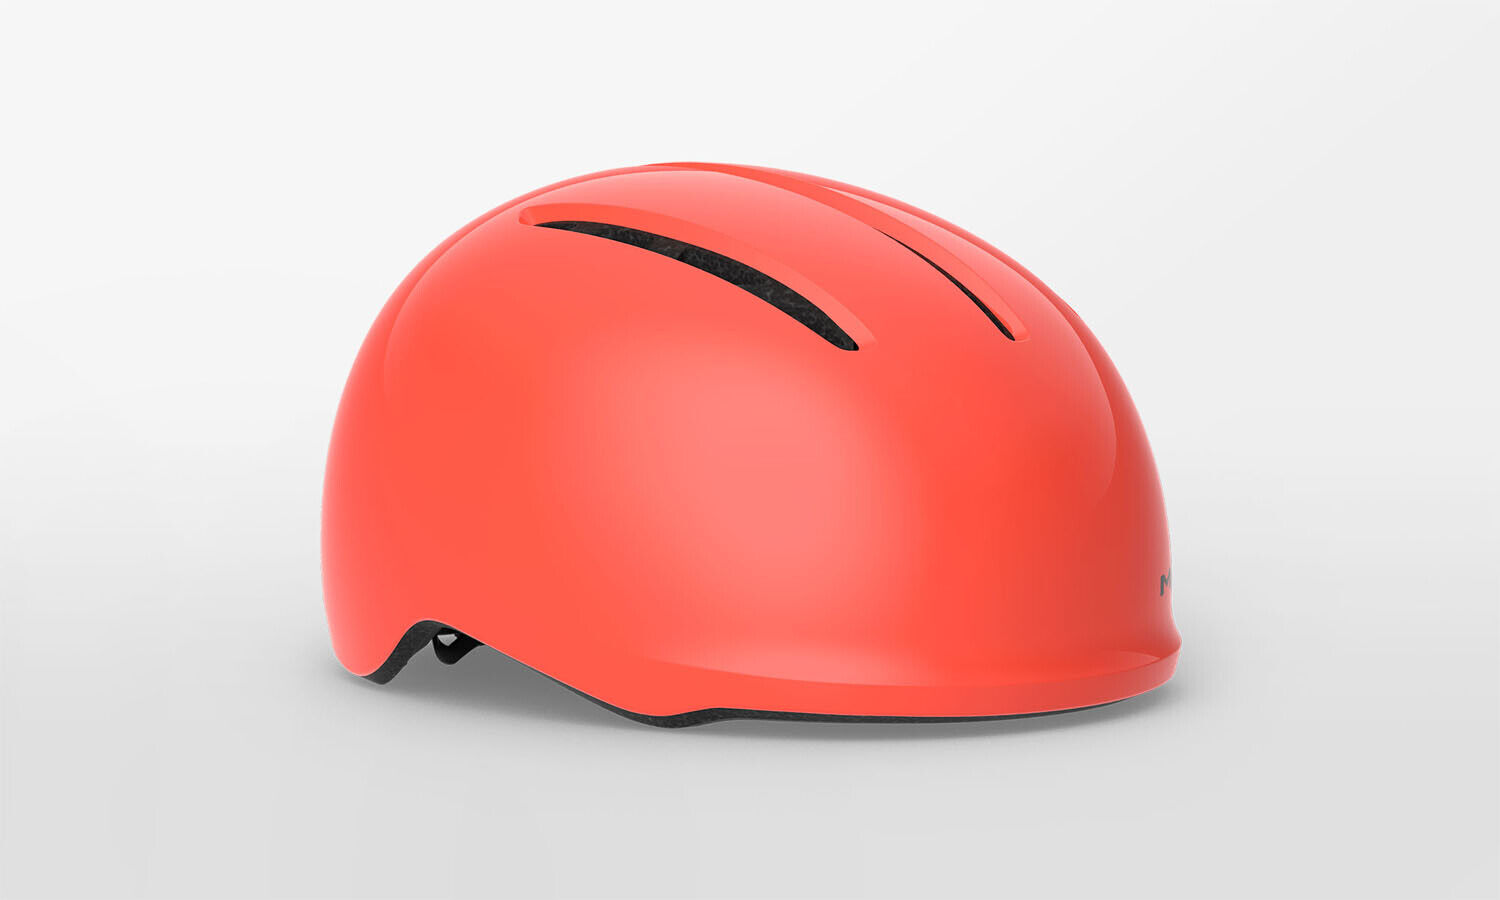 casco met vibe coral lucido 3hm155 or1